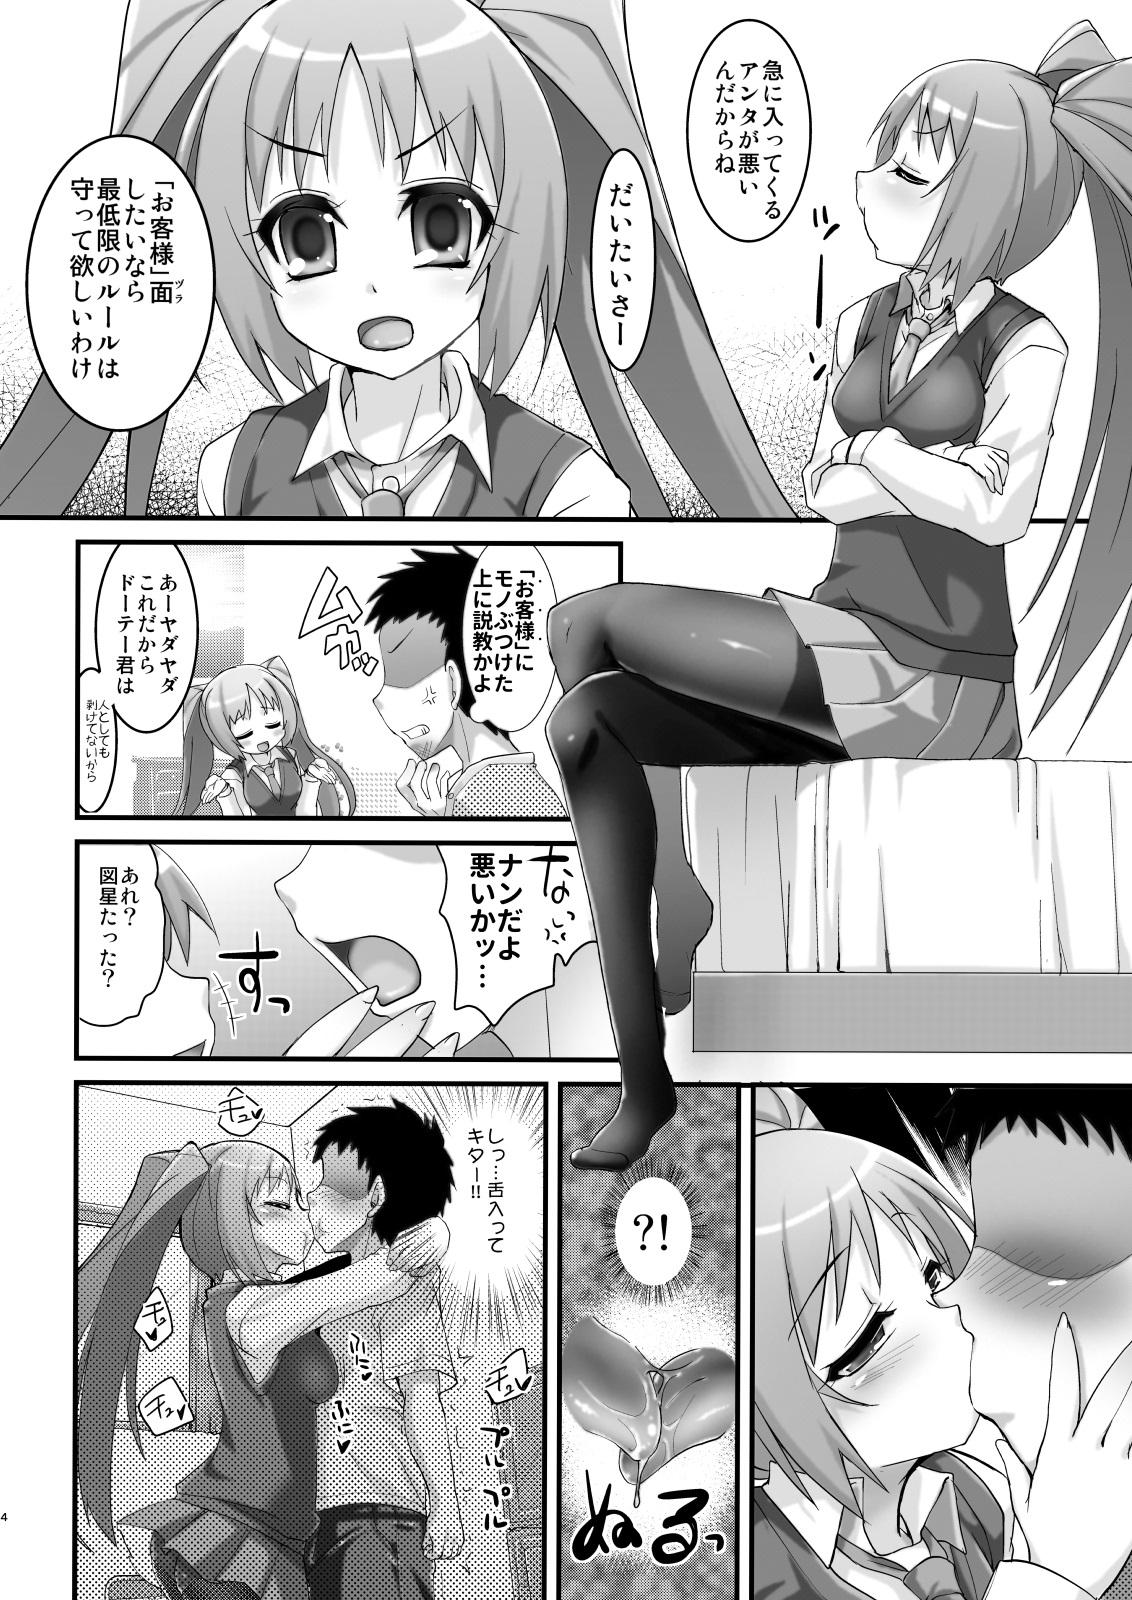 Analplay Tsundere Tights to Twintails - Original Perfect Ass - Page 4